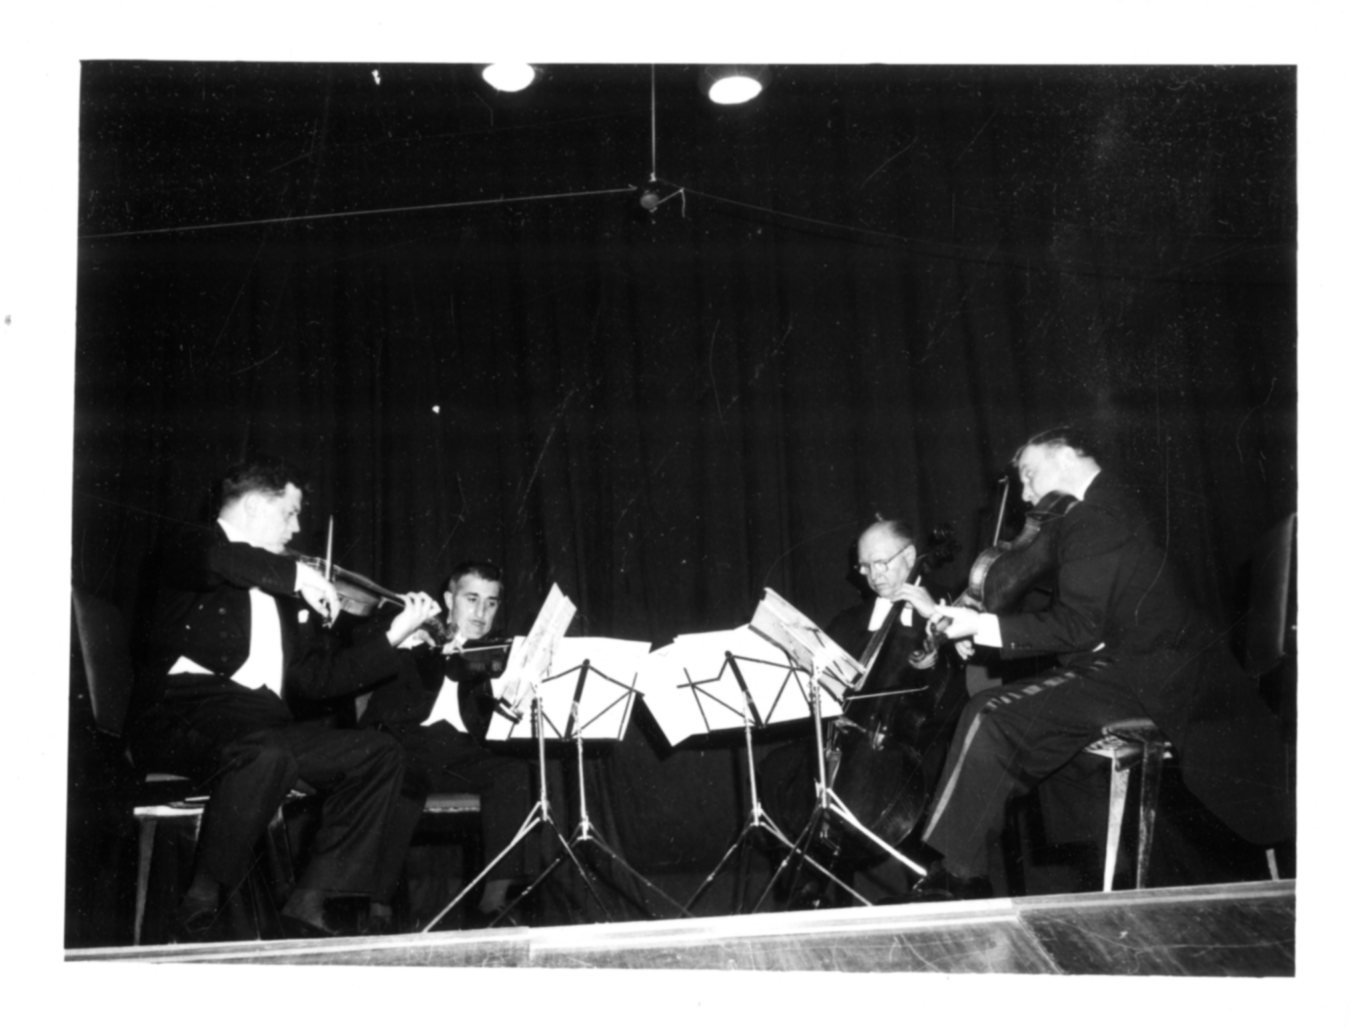 The Eastman String Quartet in recital in Istanbul, Turkey, March 25th or 26th, 1960. John Celentano Collection, Sibley Music Library.